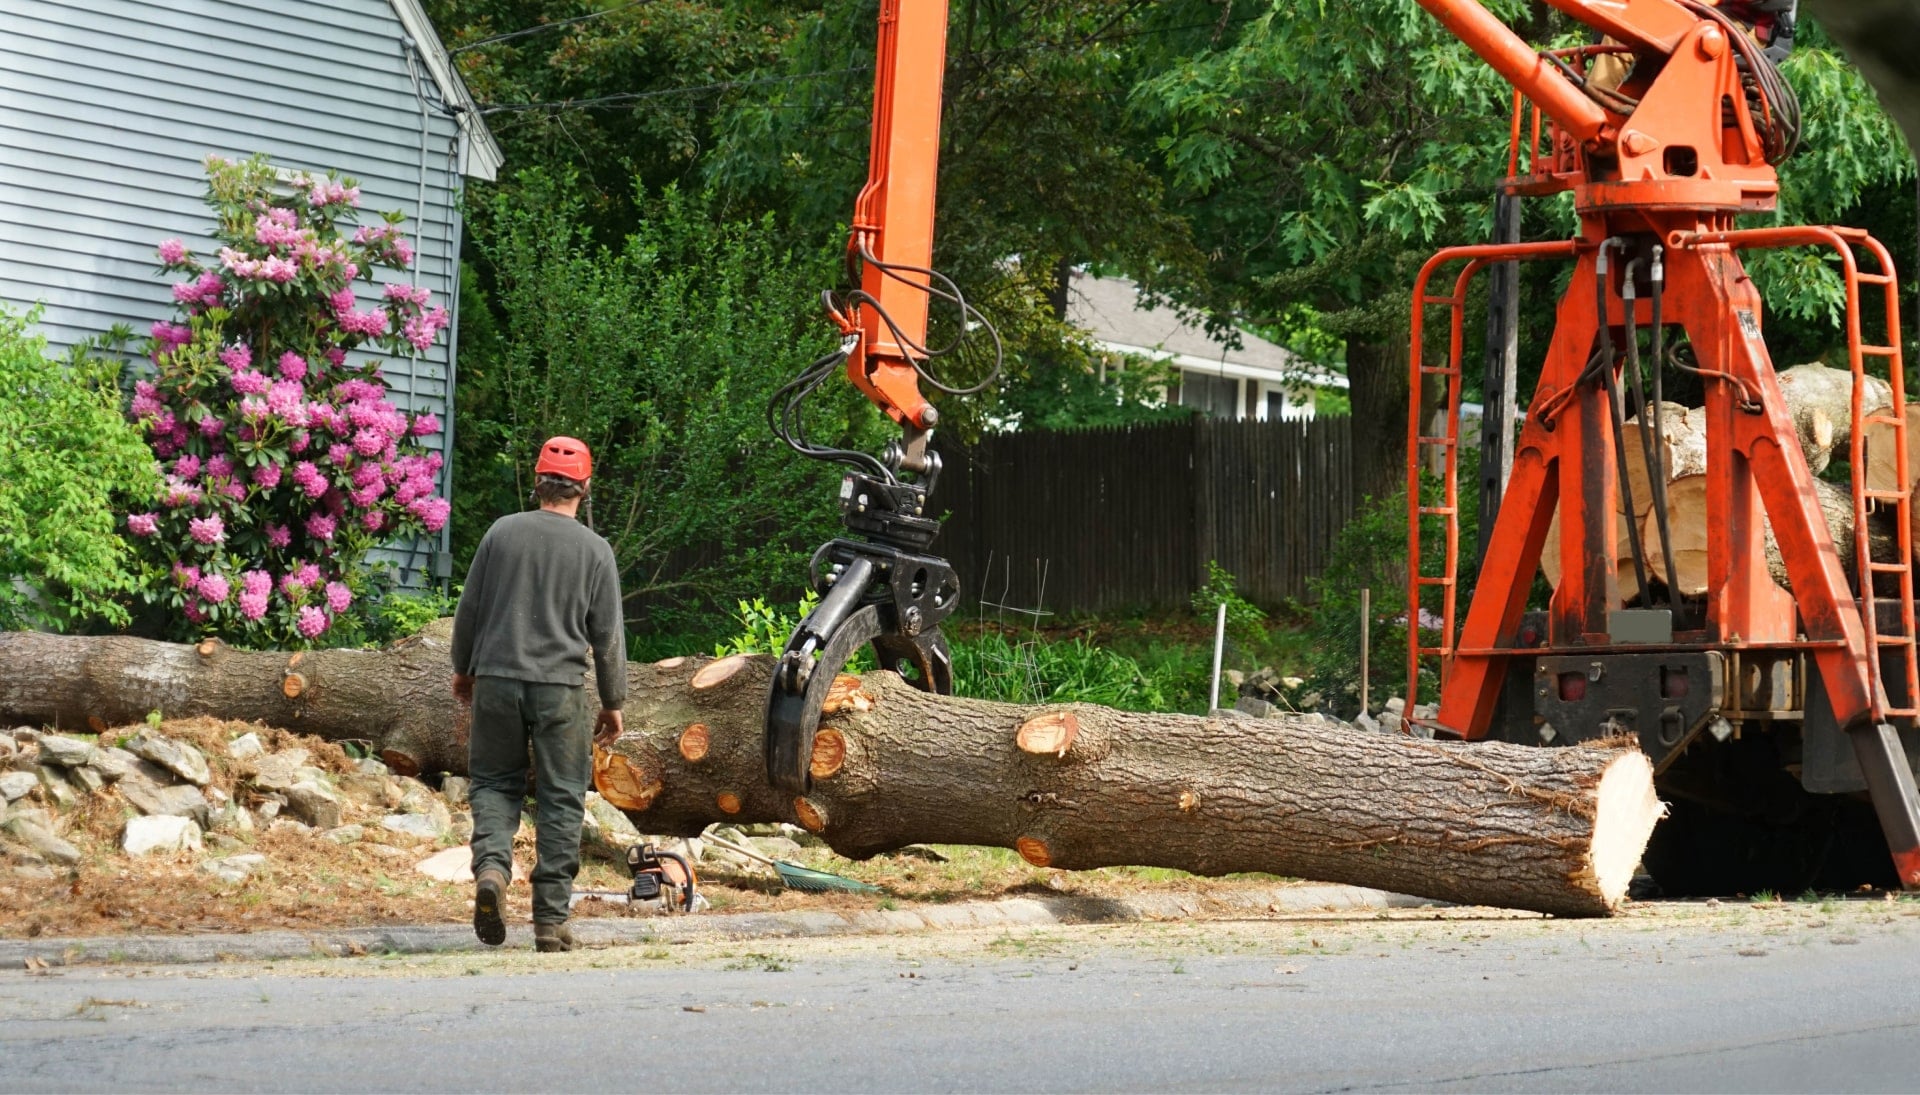 Local partner for Tree removal services in Houston